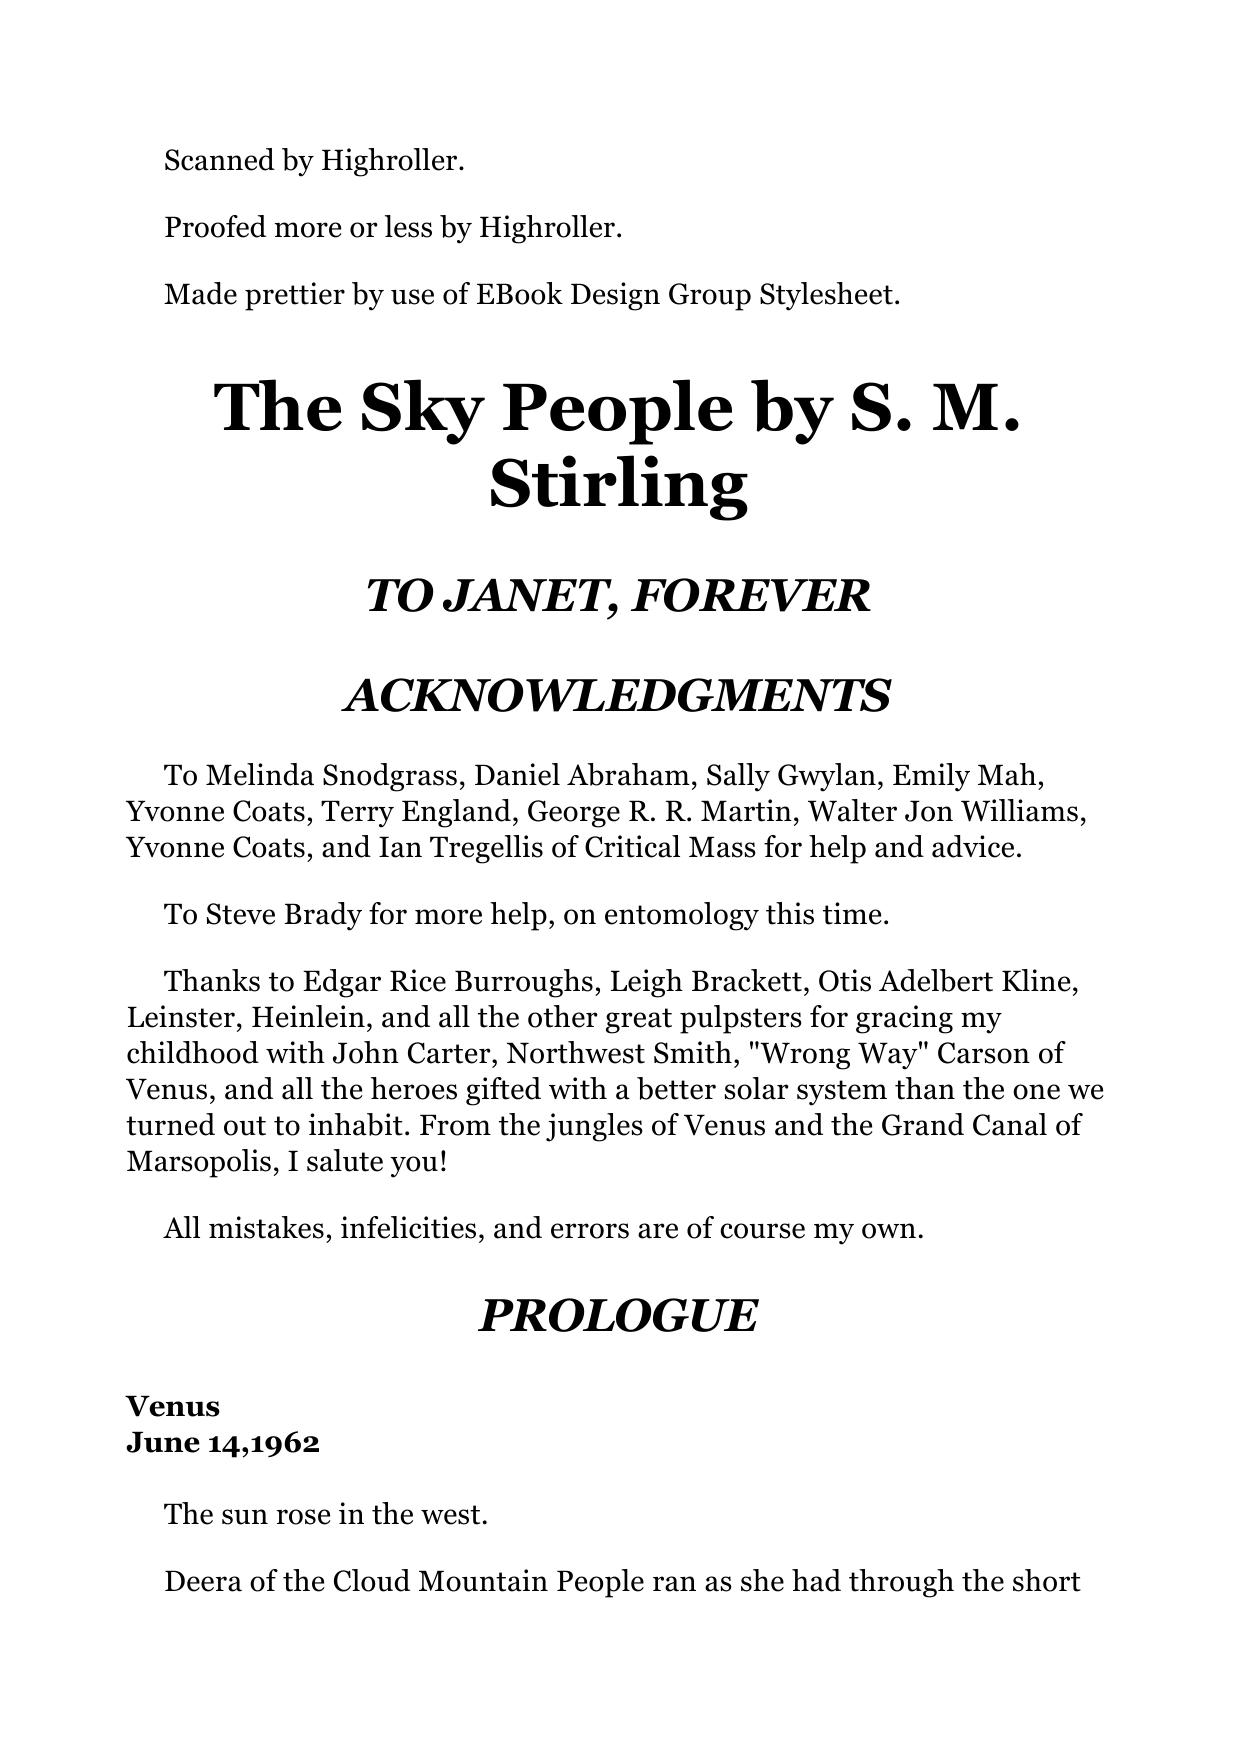 S. M. Stirling - The Sky People by S. M. Stirling